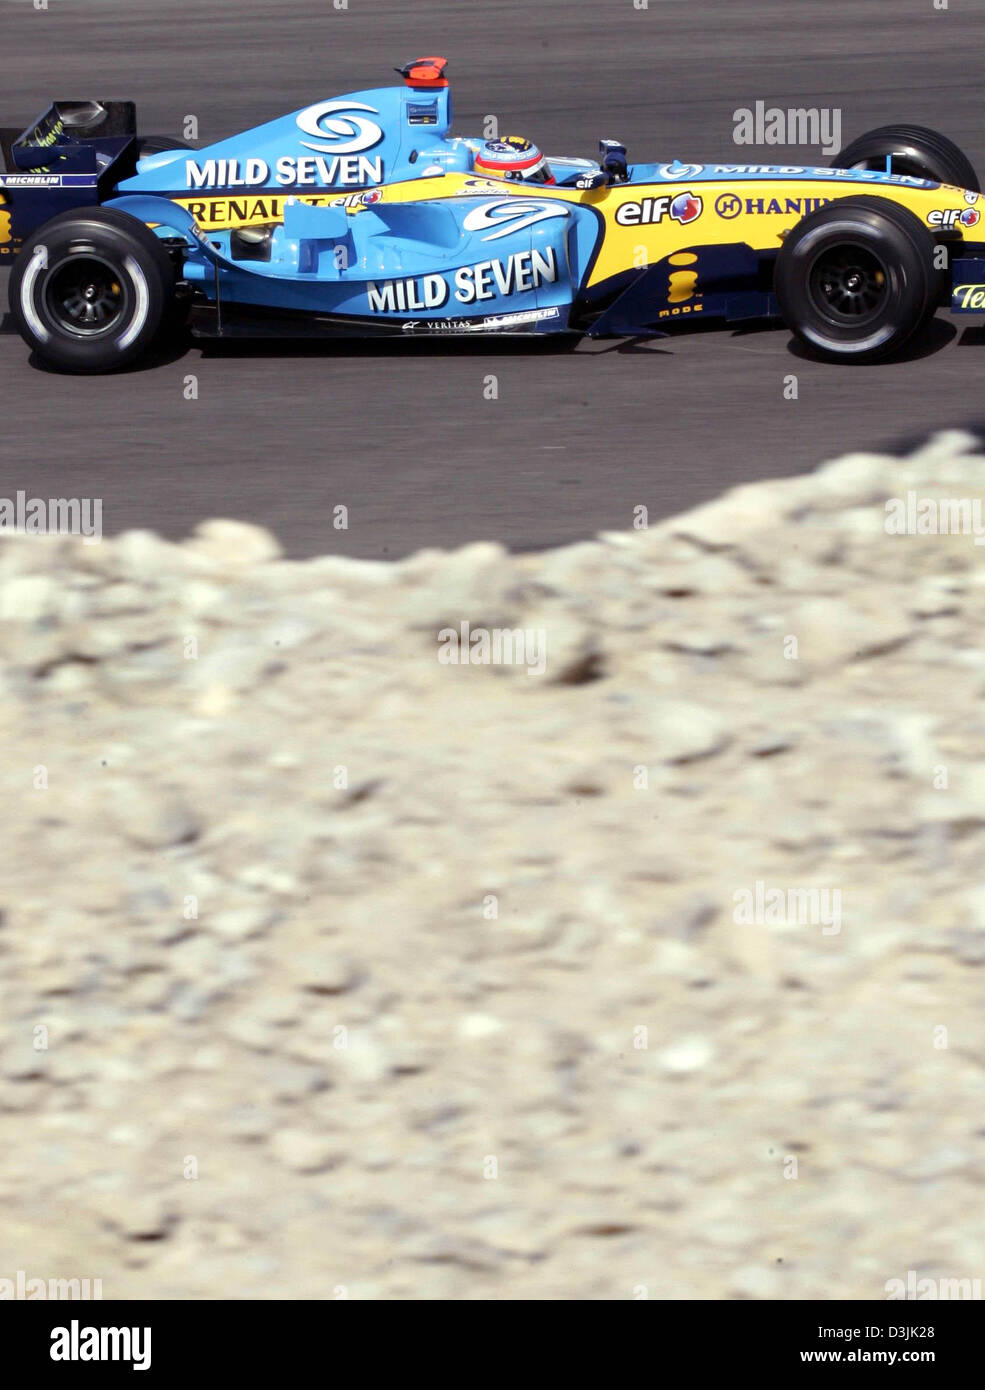 Page 2 - Renault Elf High Resolution Stock Photography and Images - Alamy